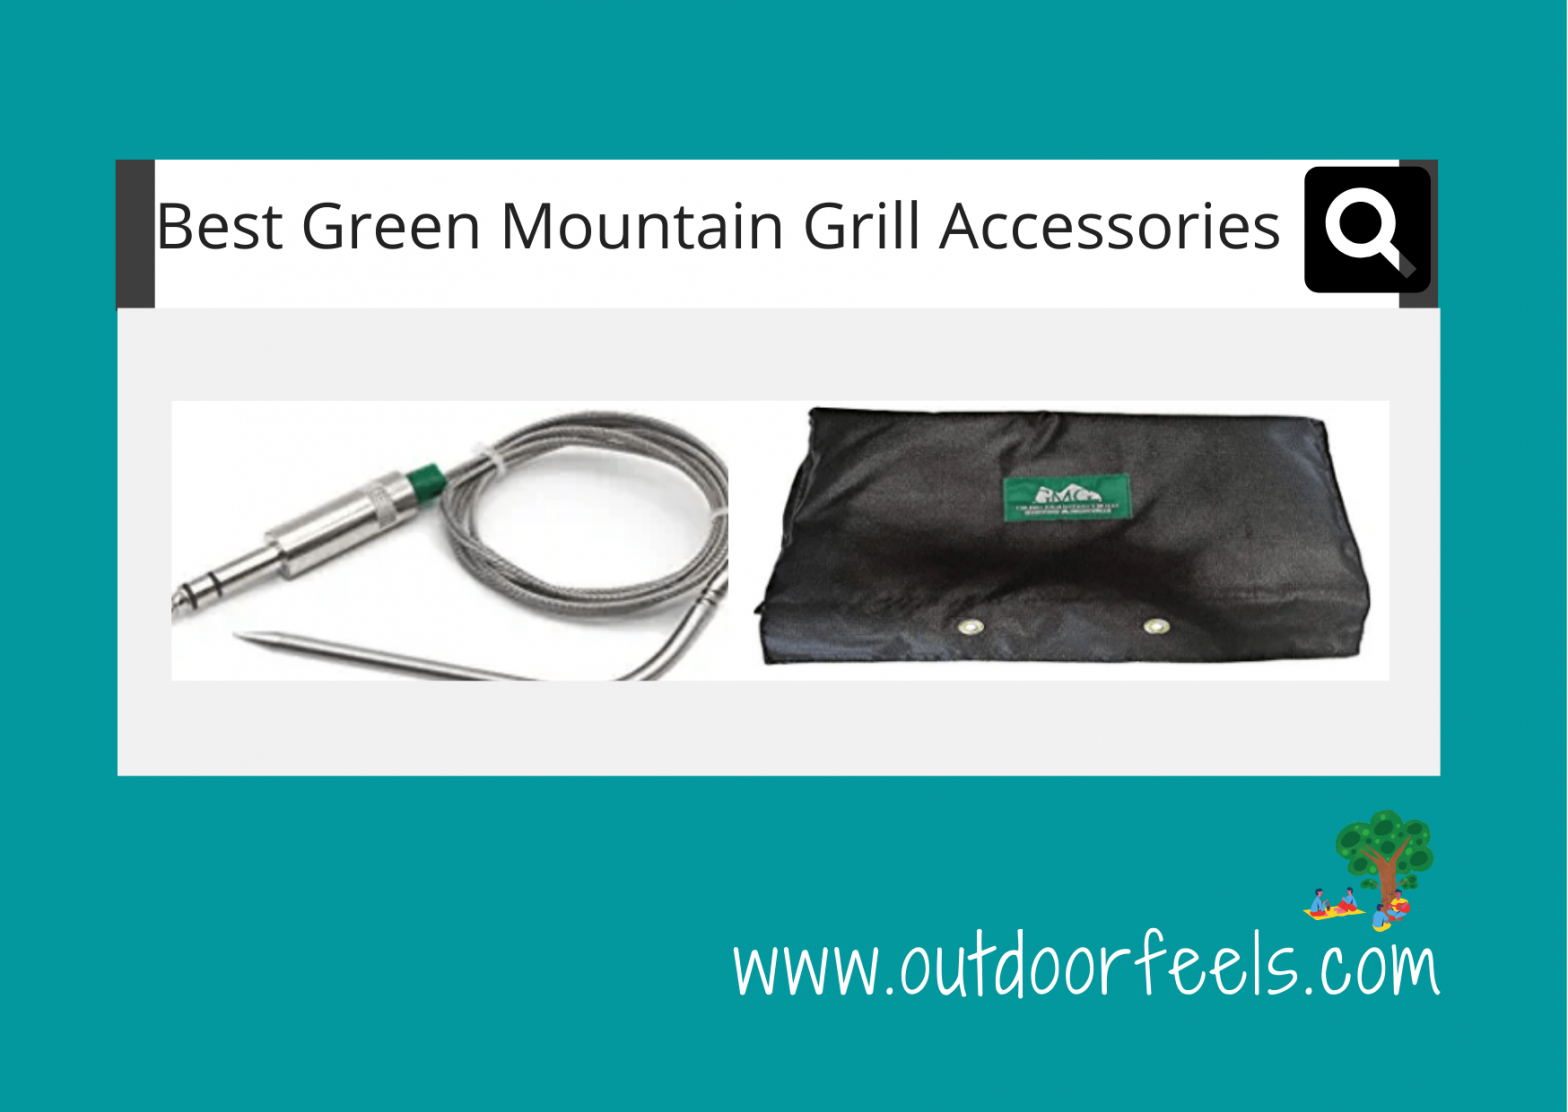 7 Best Green Mountain Grill Accessories_Featured Image